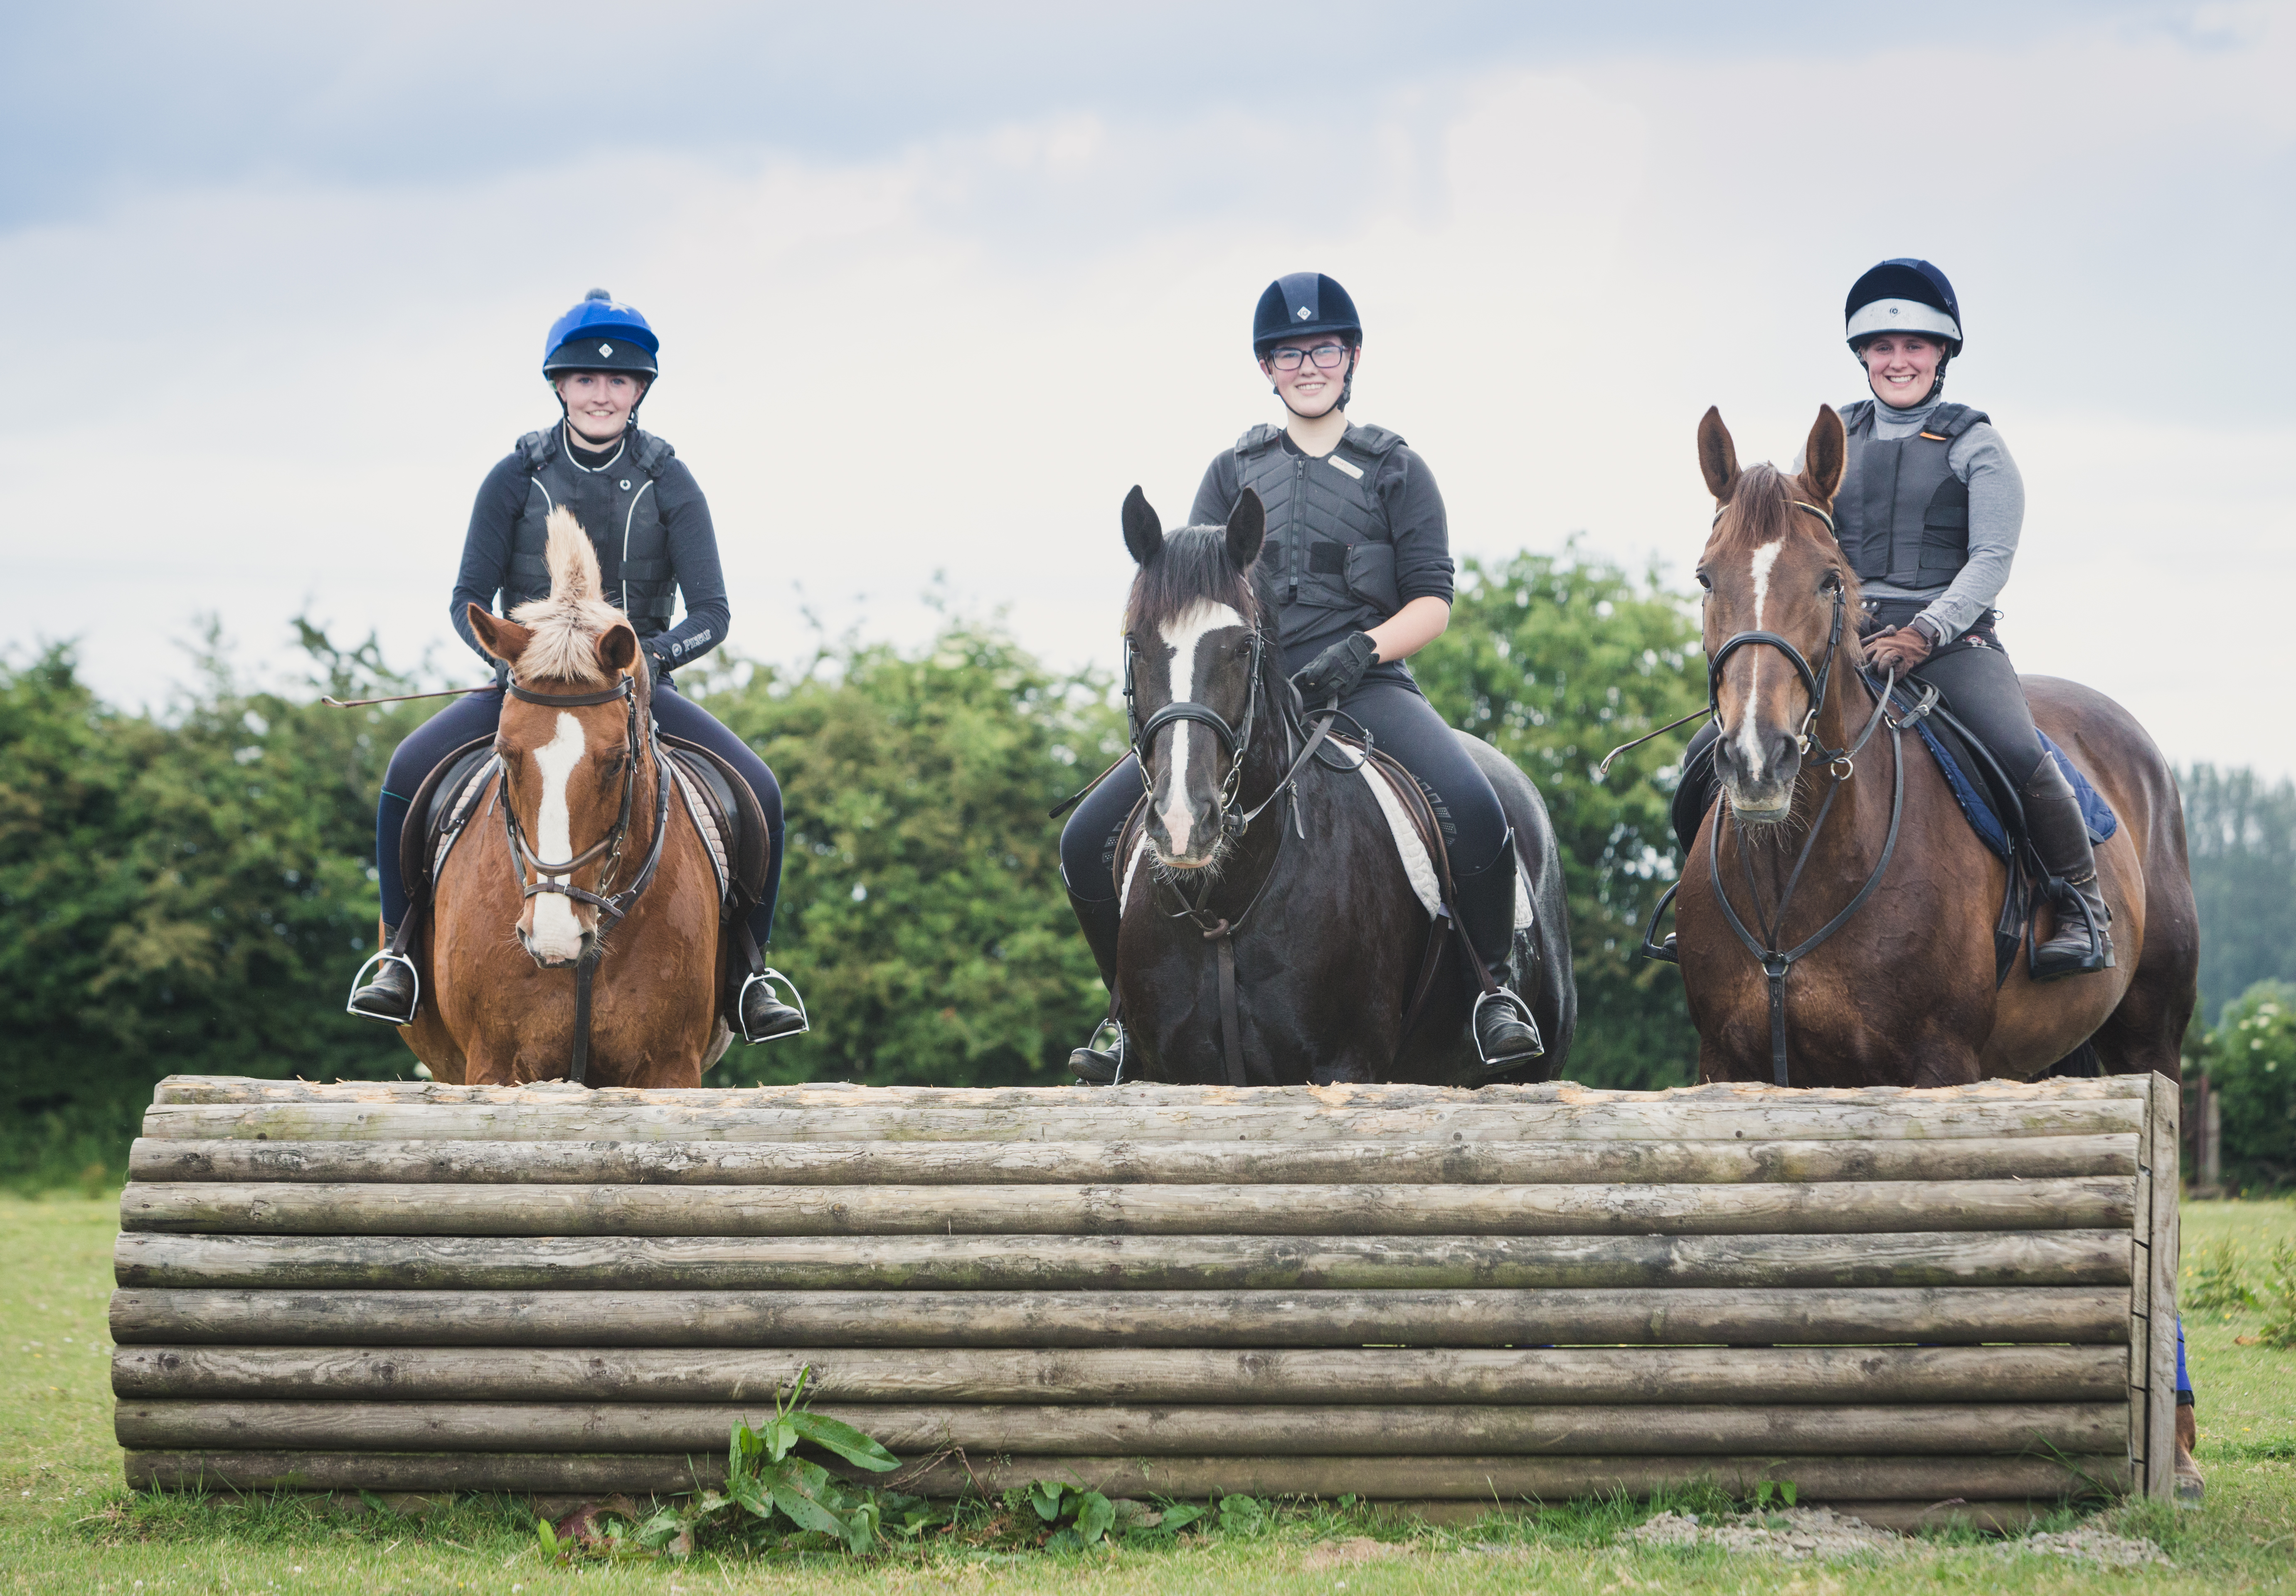 Myerscough College - one of Britain's leading equine colleges